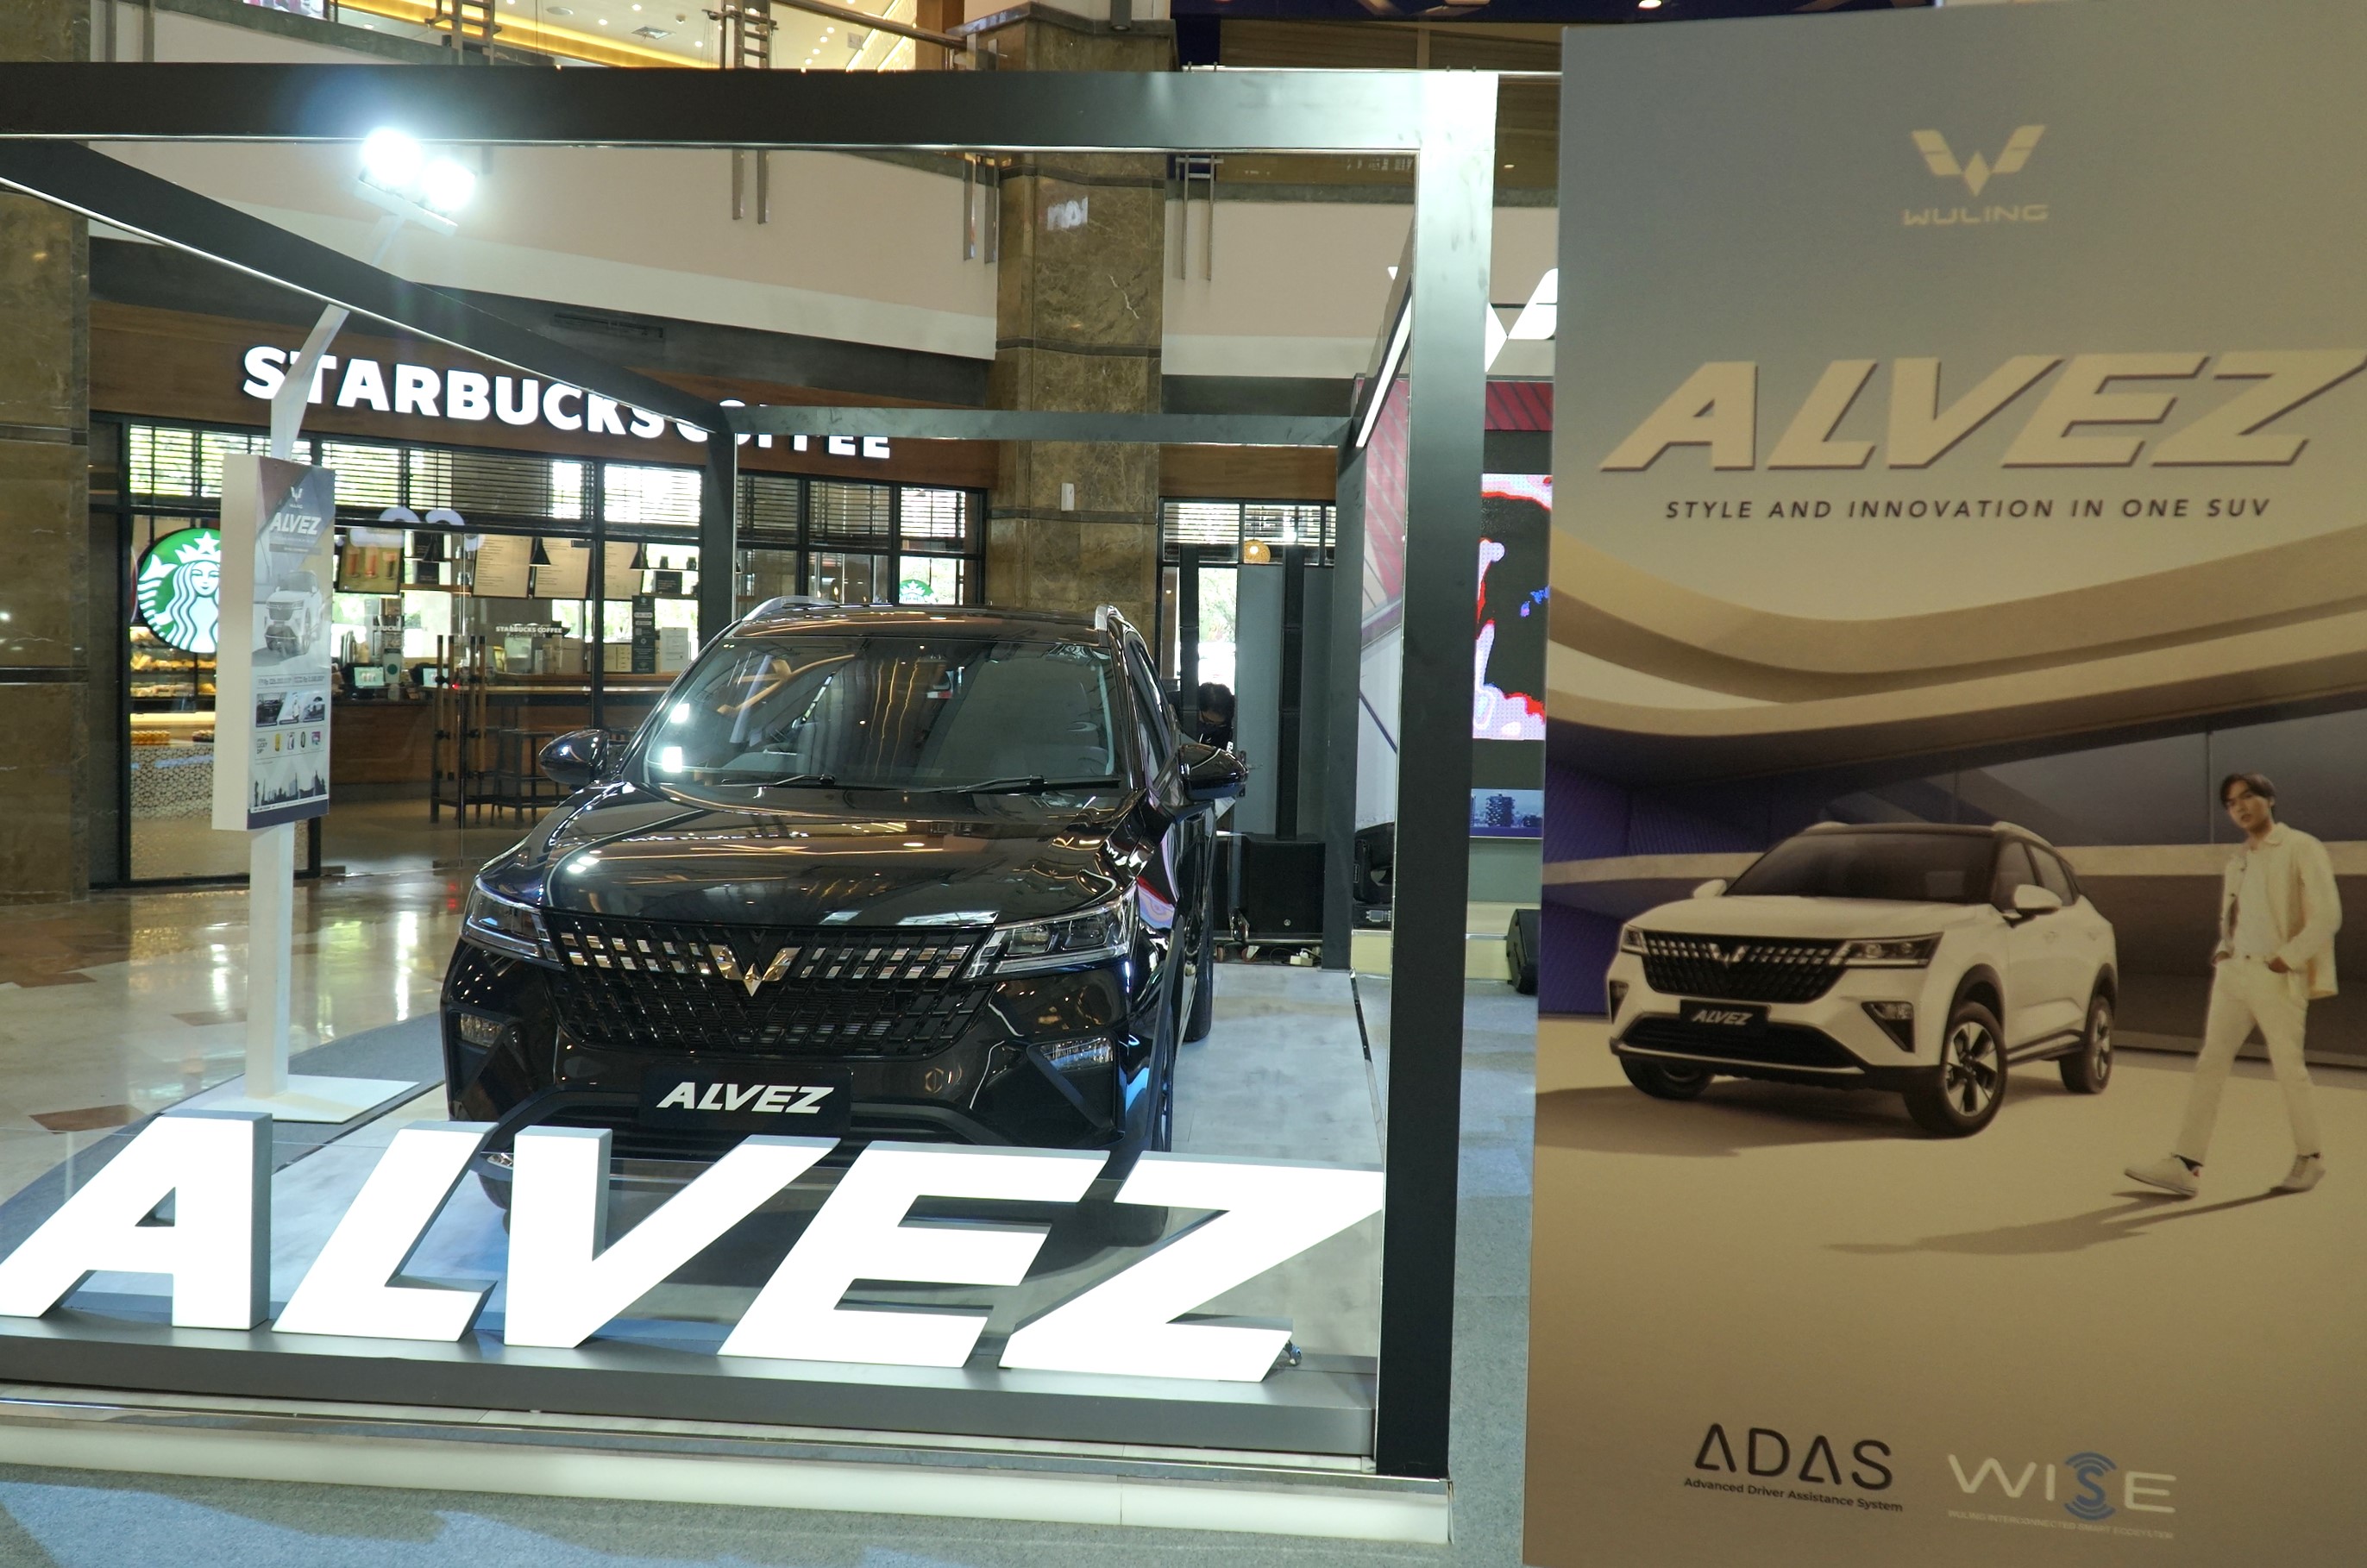 Image Wuling Officially Launches Alvez, ‘Style and Innovation in One SUV’ in Pekanbaru